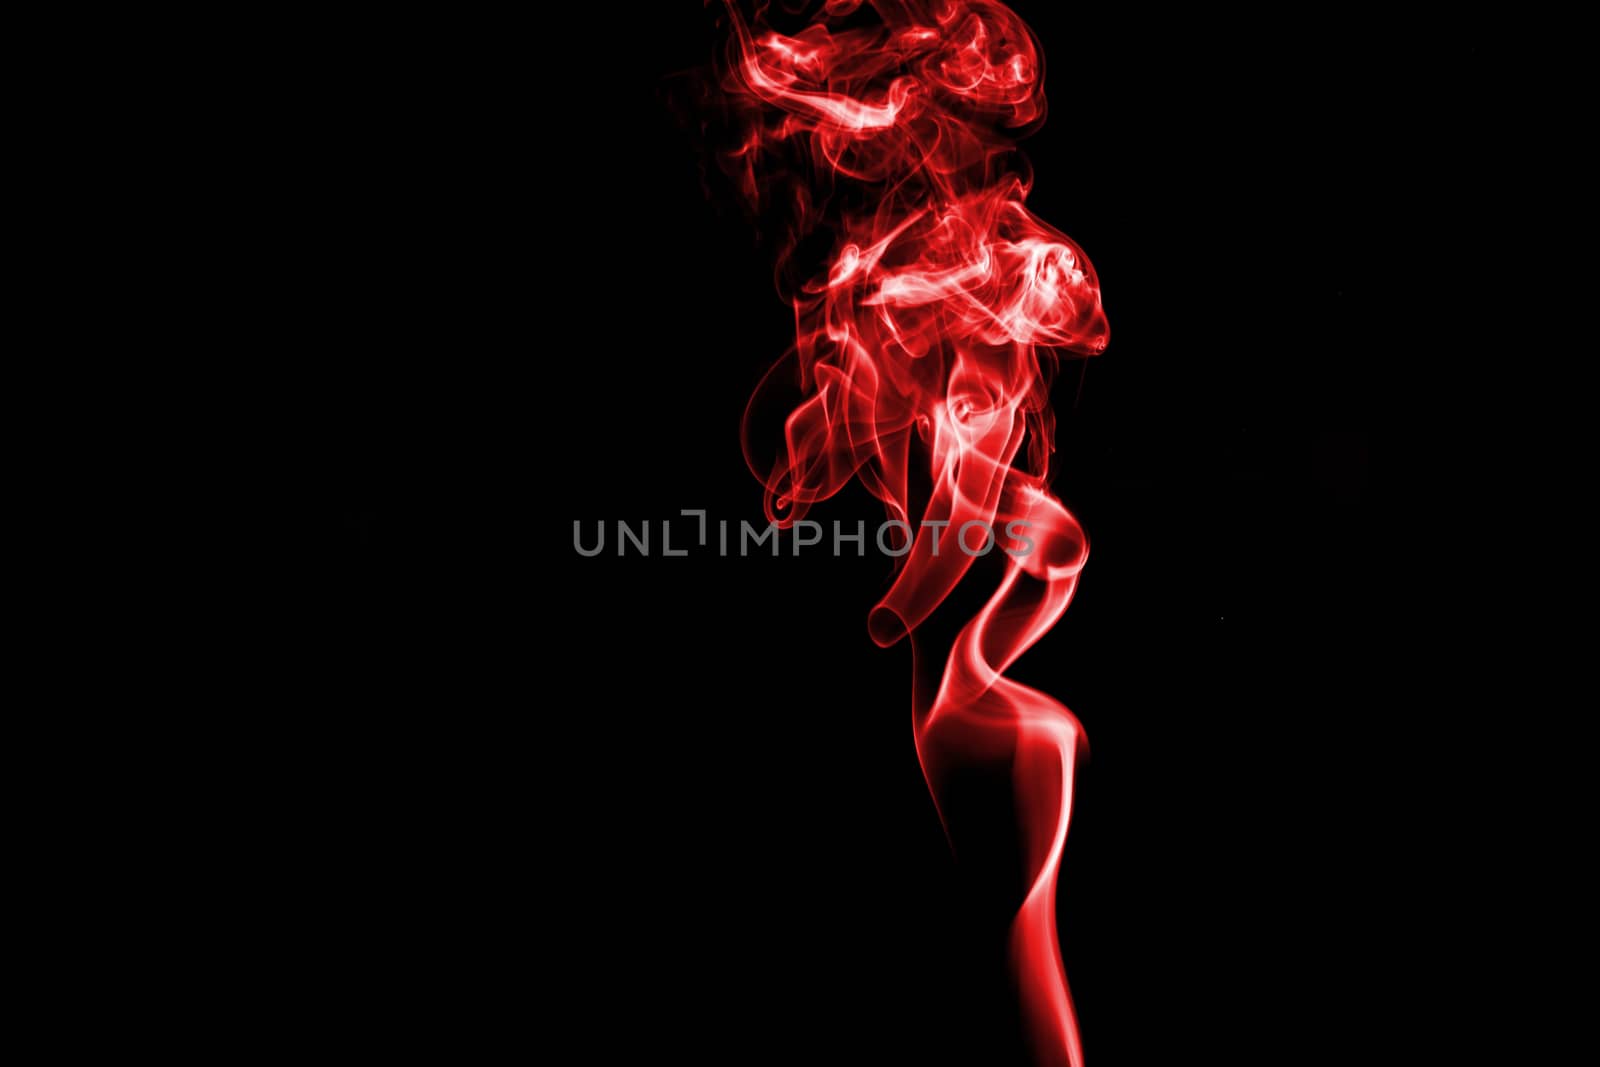 red smoke with lights on black background